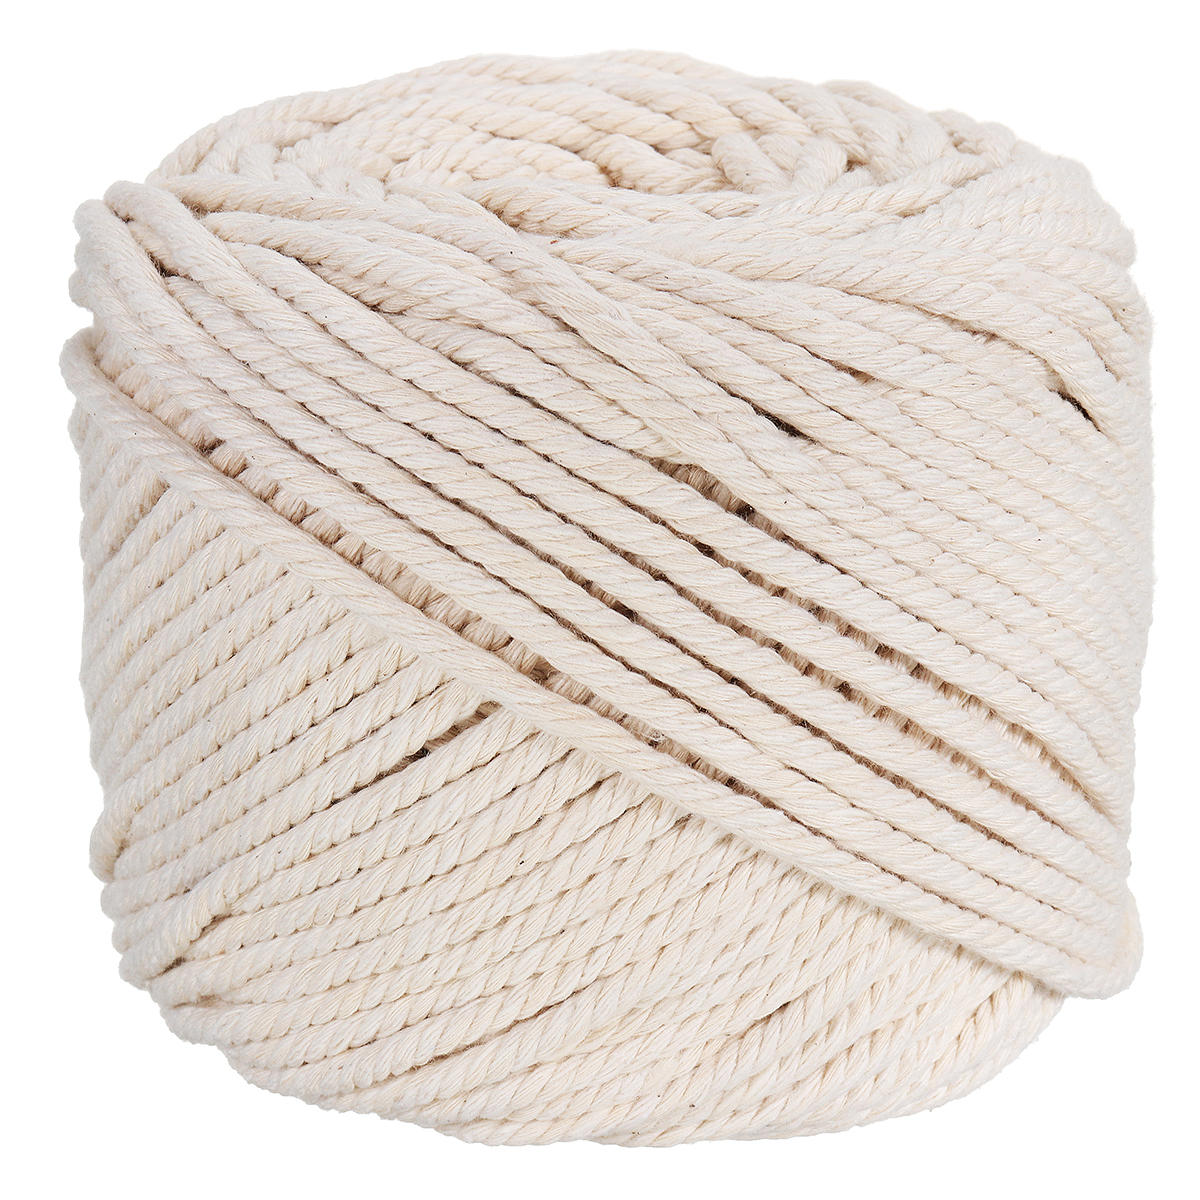 

4mmx100m Natural Beige Cotton Twisted Cord Rope DIY Craft Macrame Woven String Braided Wire